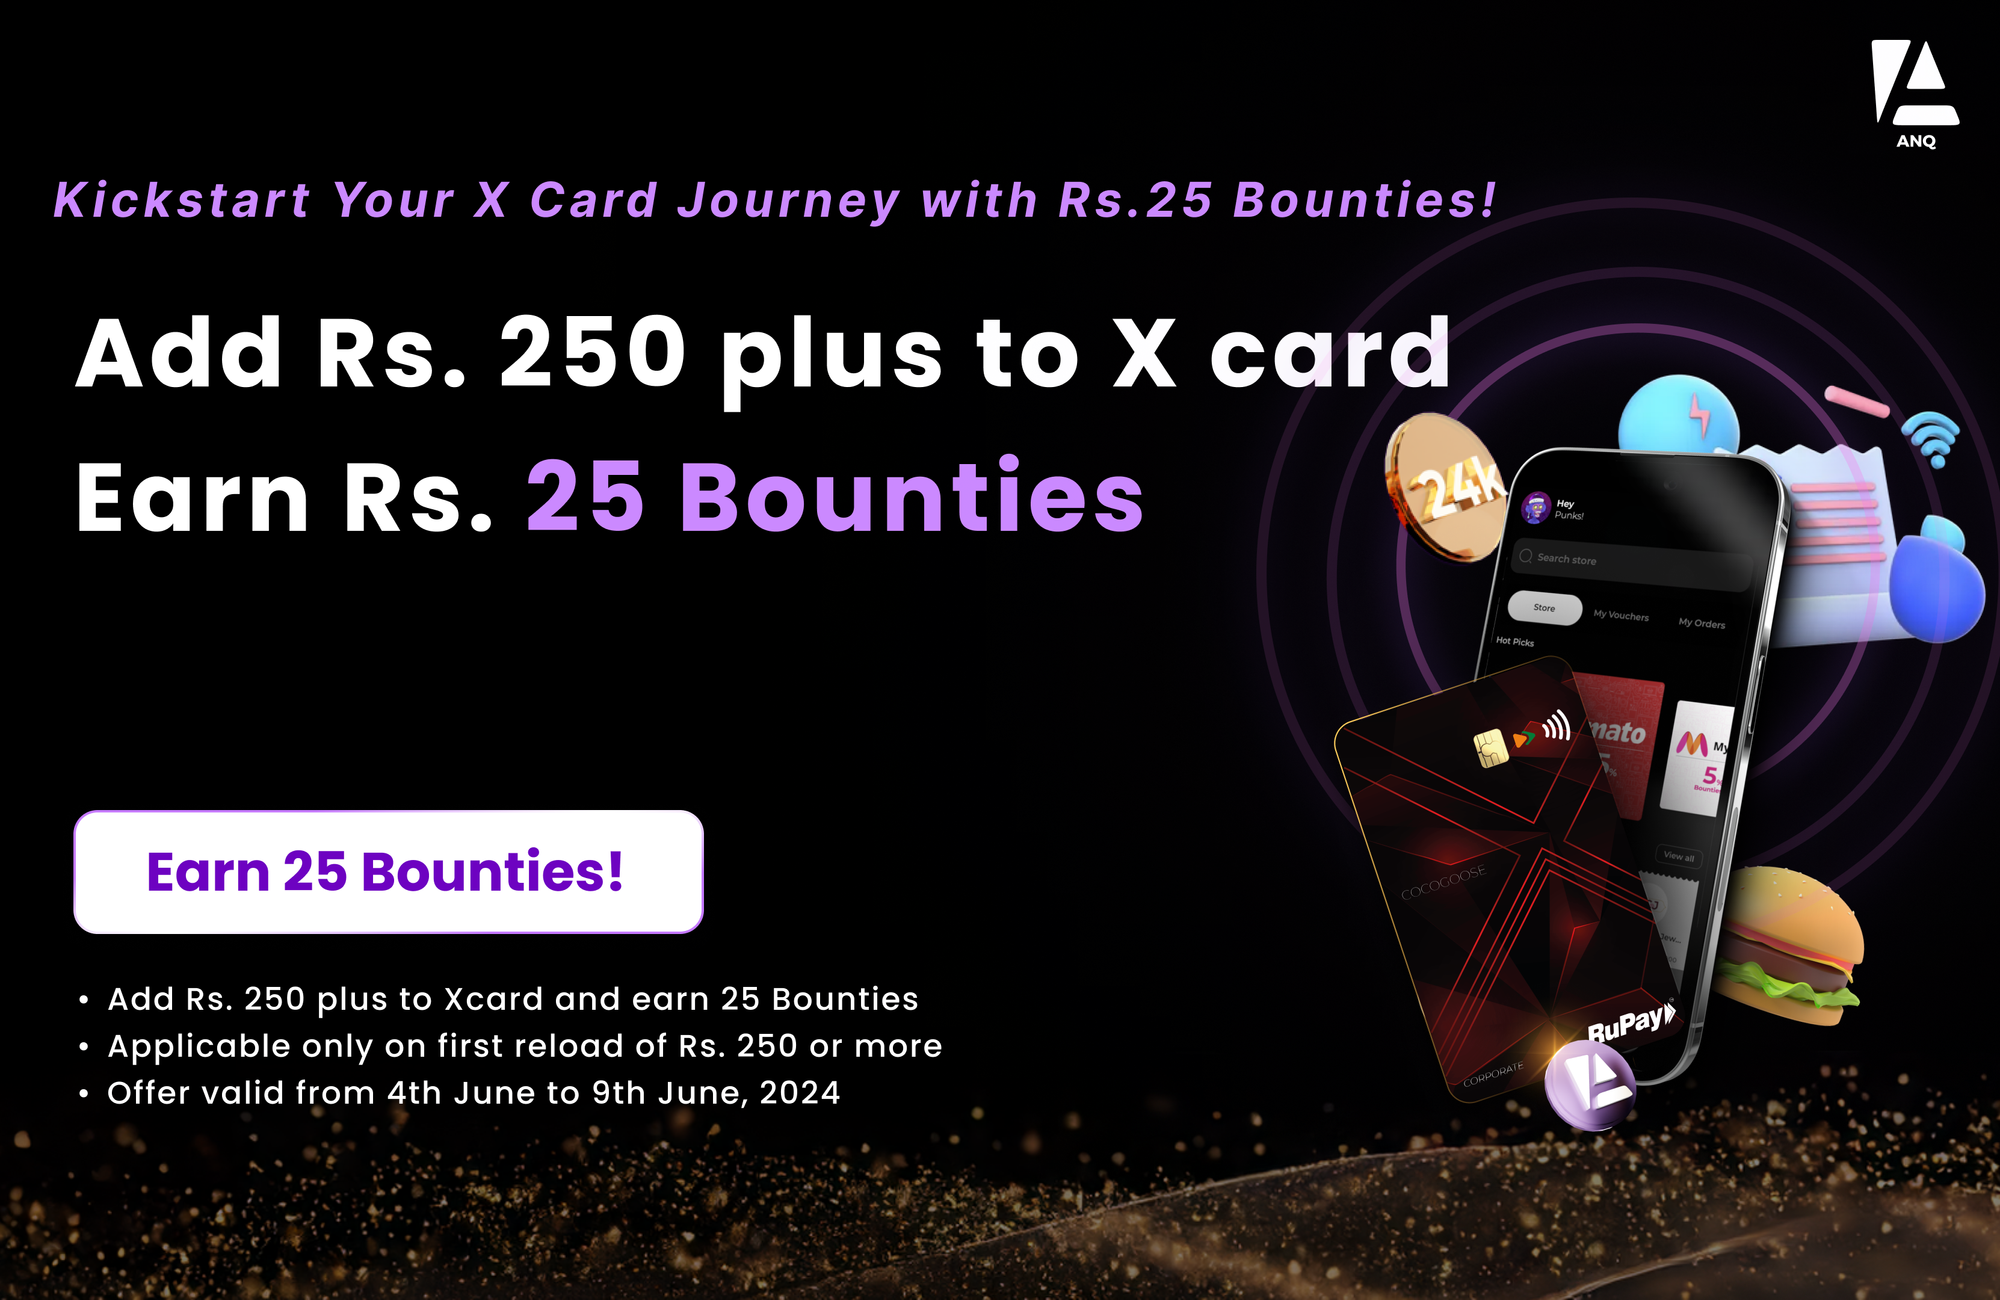 🔥 Kickstart Your X Card Journey with Rs. 25 Bounties! 🔥